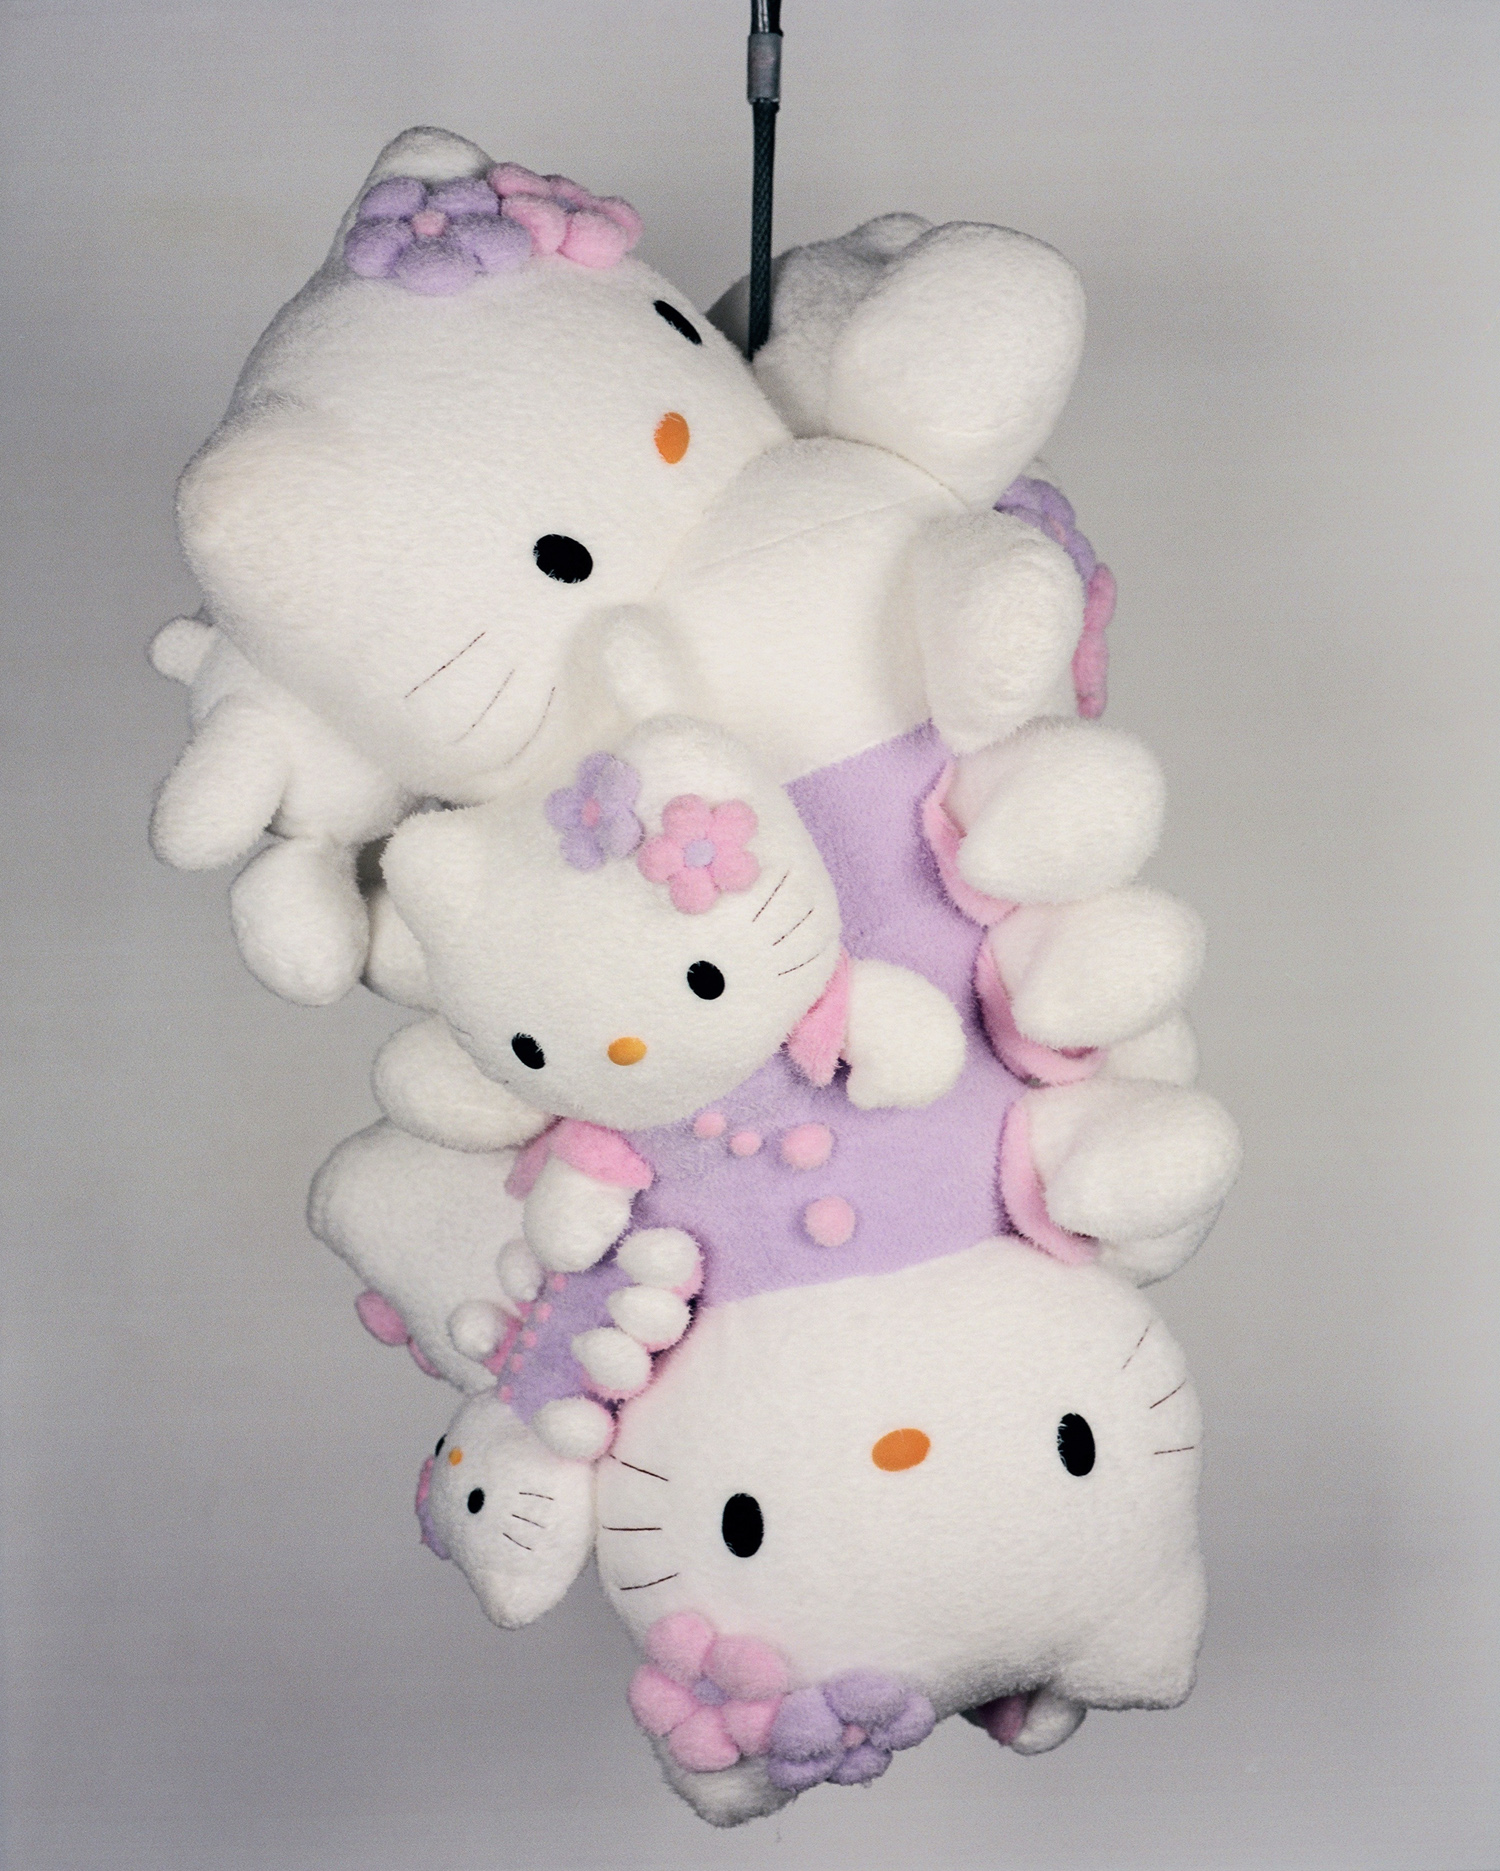  Polymorphic Kittyclysm, 2004 mixed media and bicycle chain dimensions vary Commissioned by Sanrio for Kitty EX 